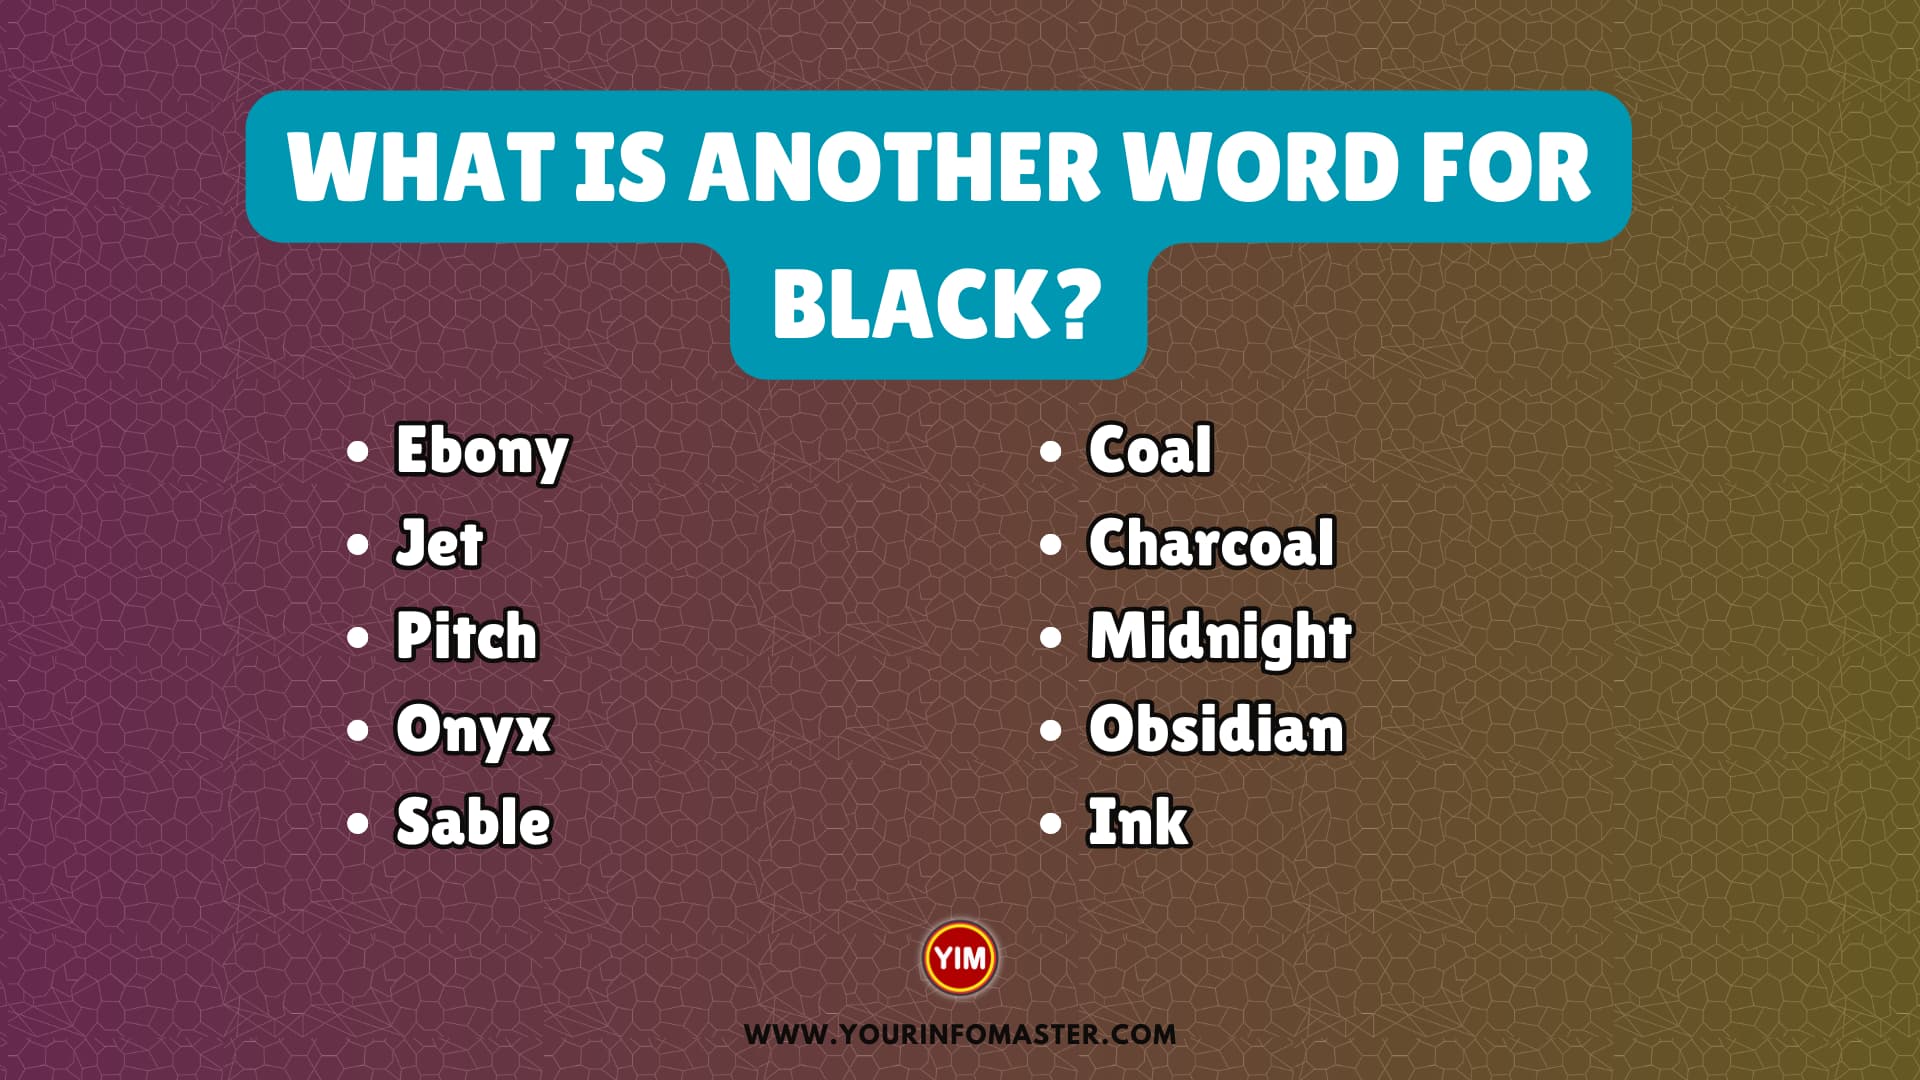 What is another word for Black